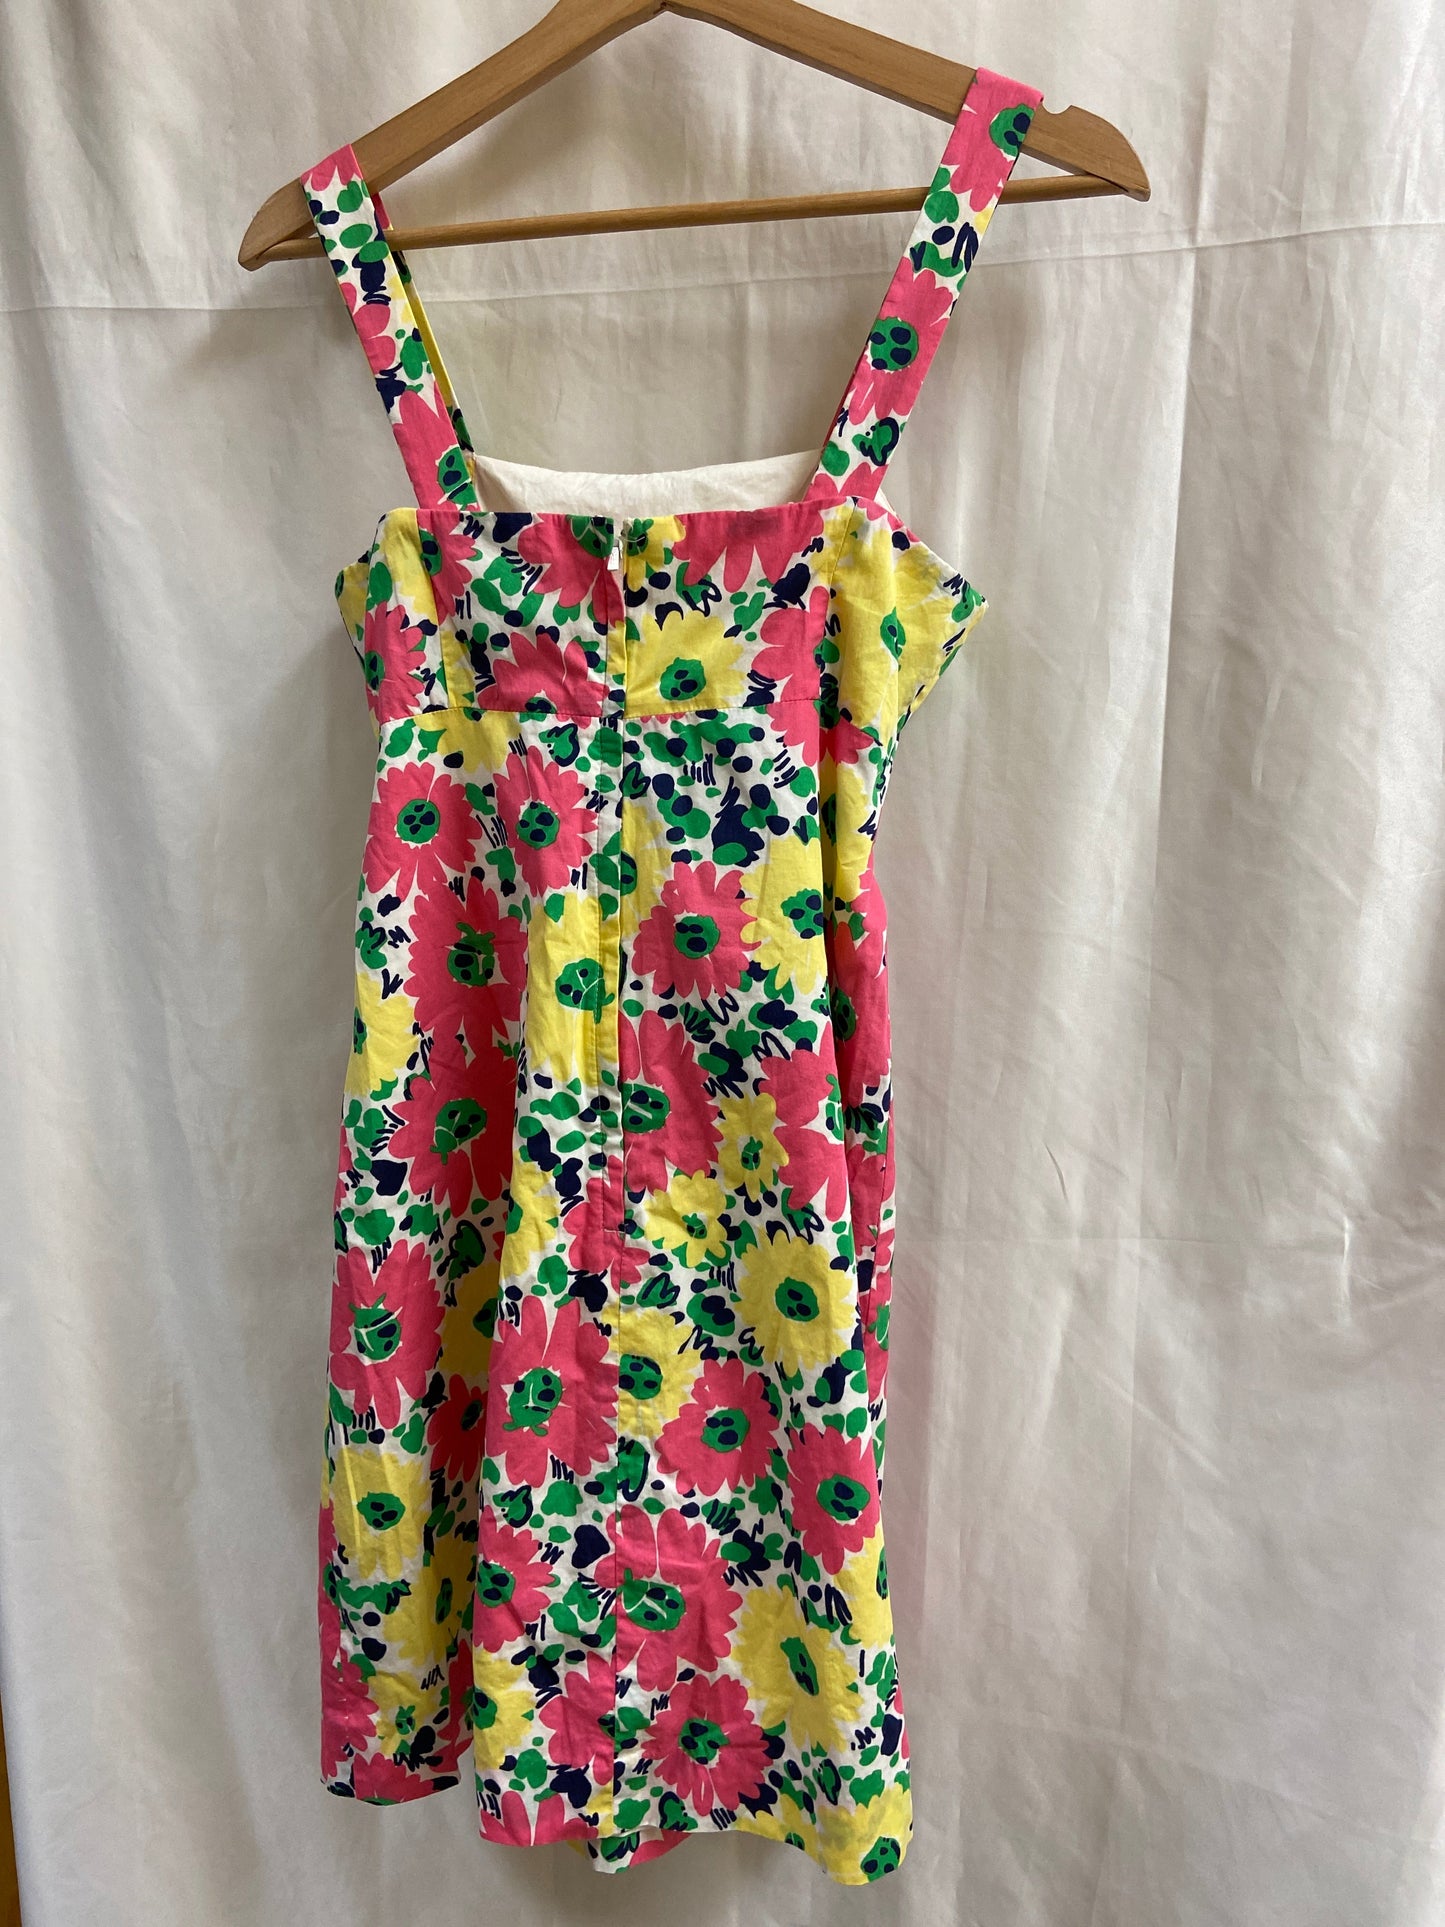 Dress Designer By Lilly Pulitzer  Size: 4